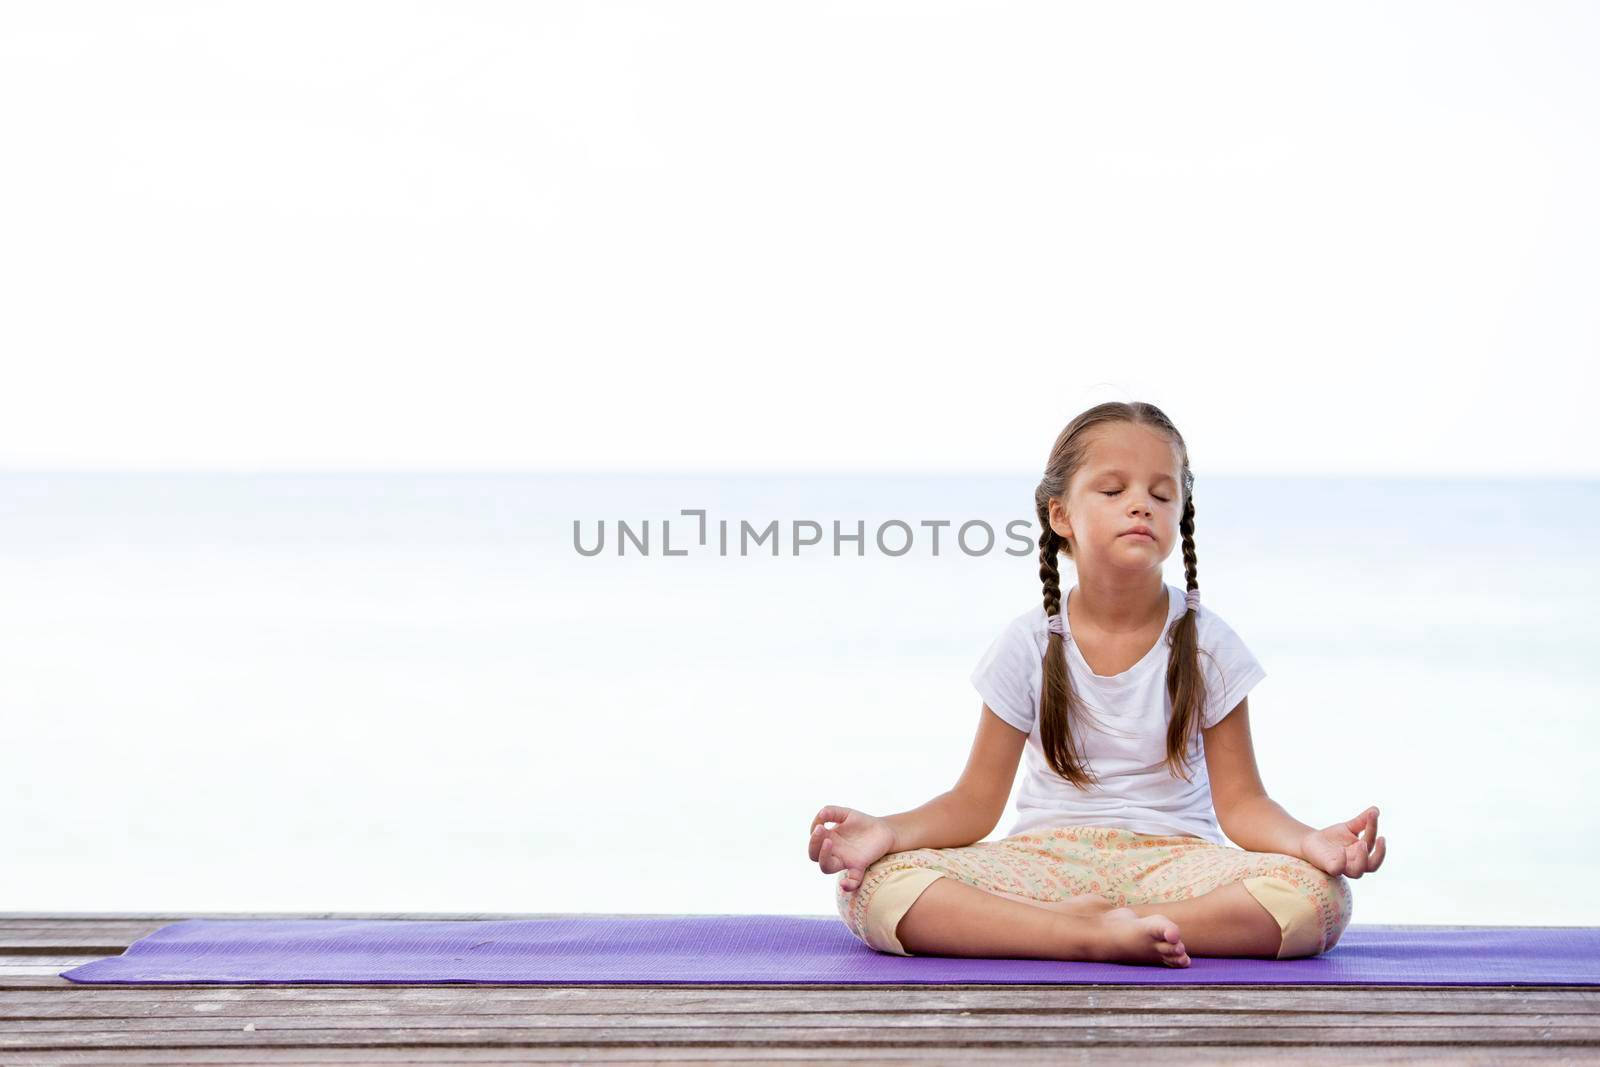 Child doing exercise on platform outdoors. Healthy lifestyle. Yoga girl by Jyliana